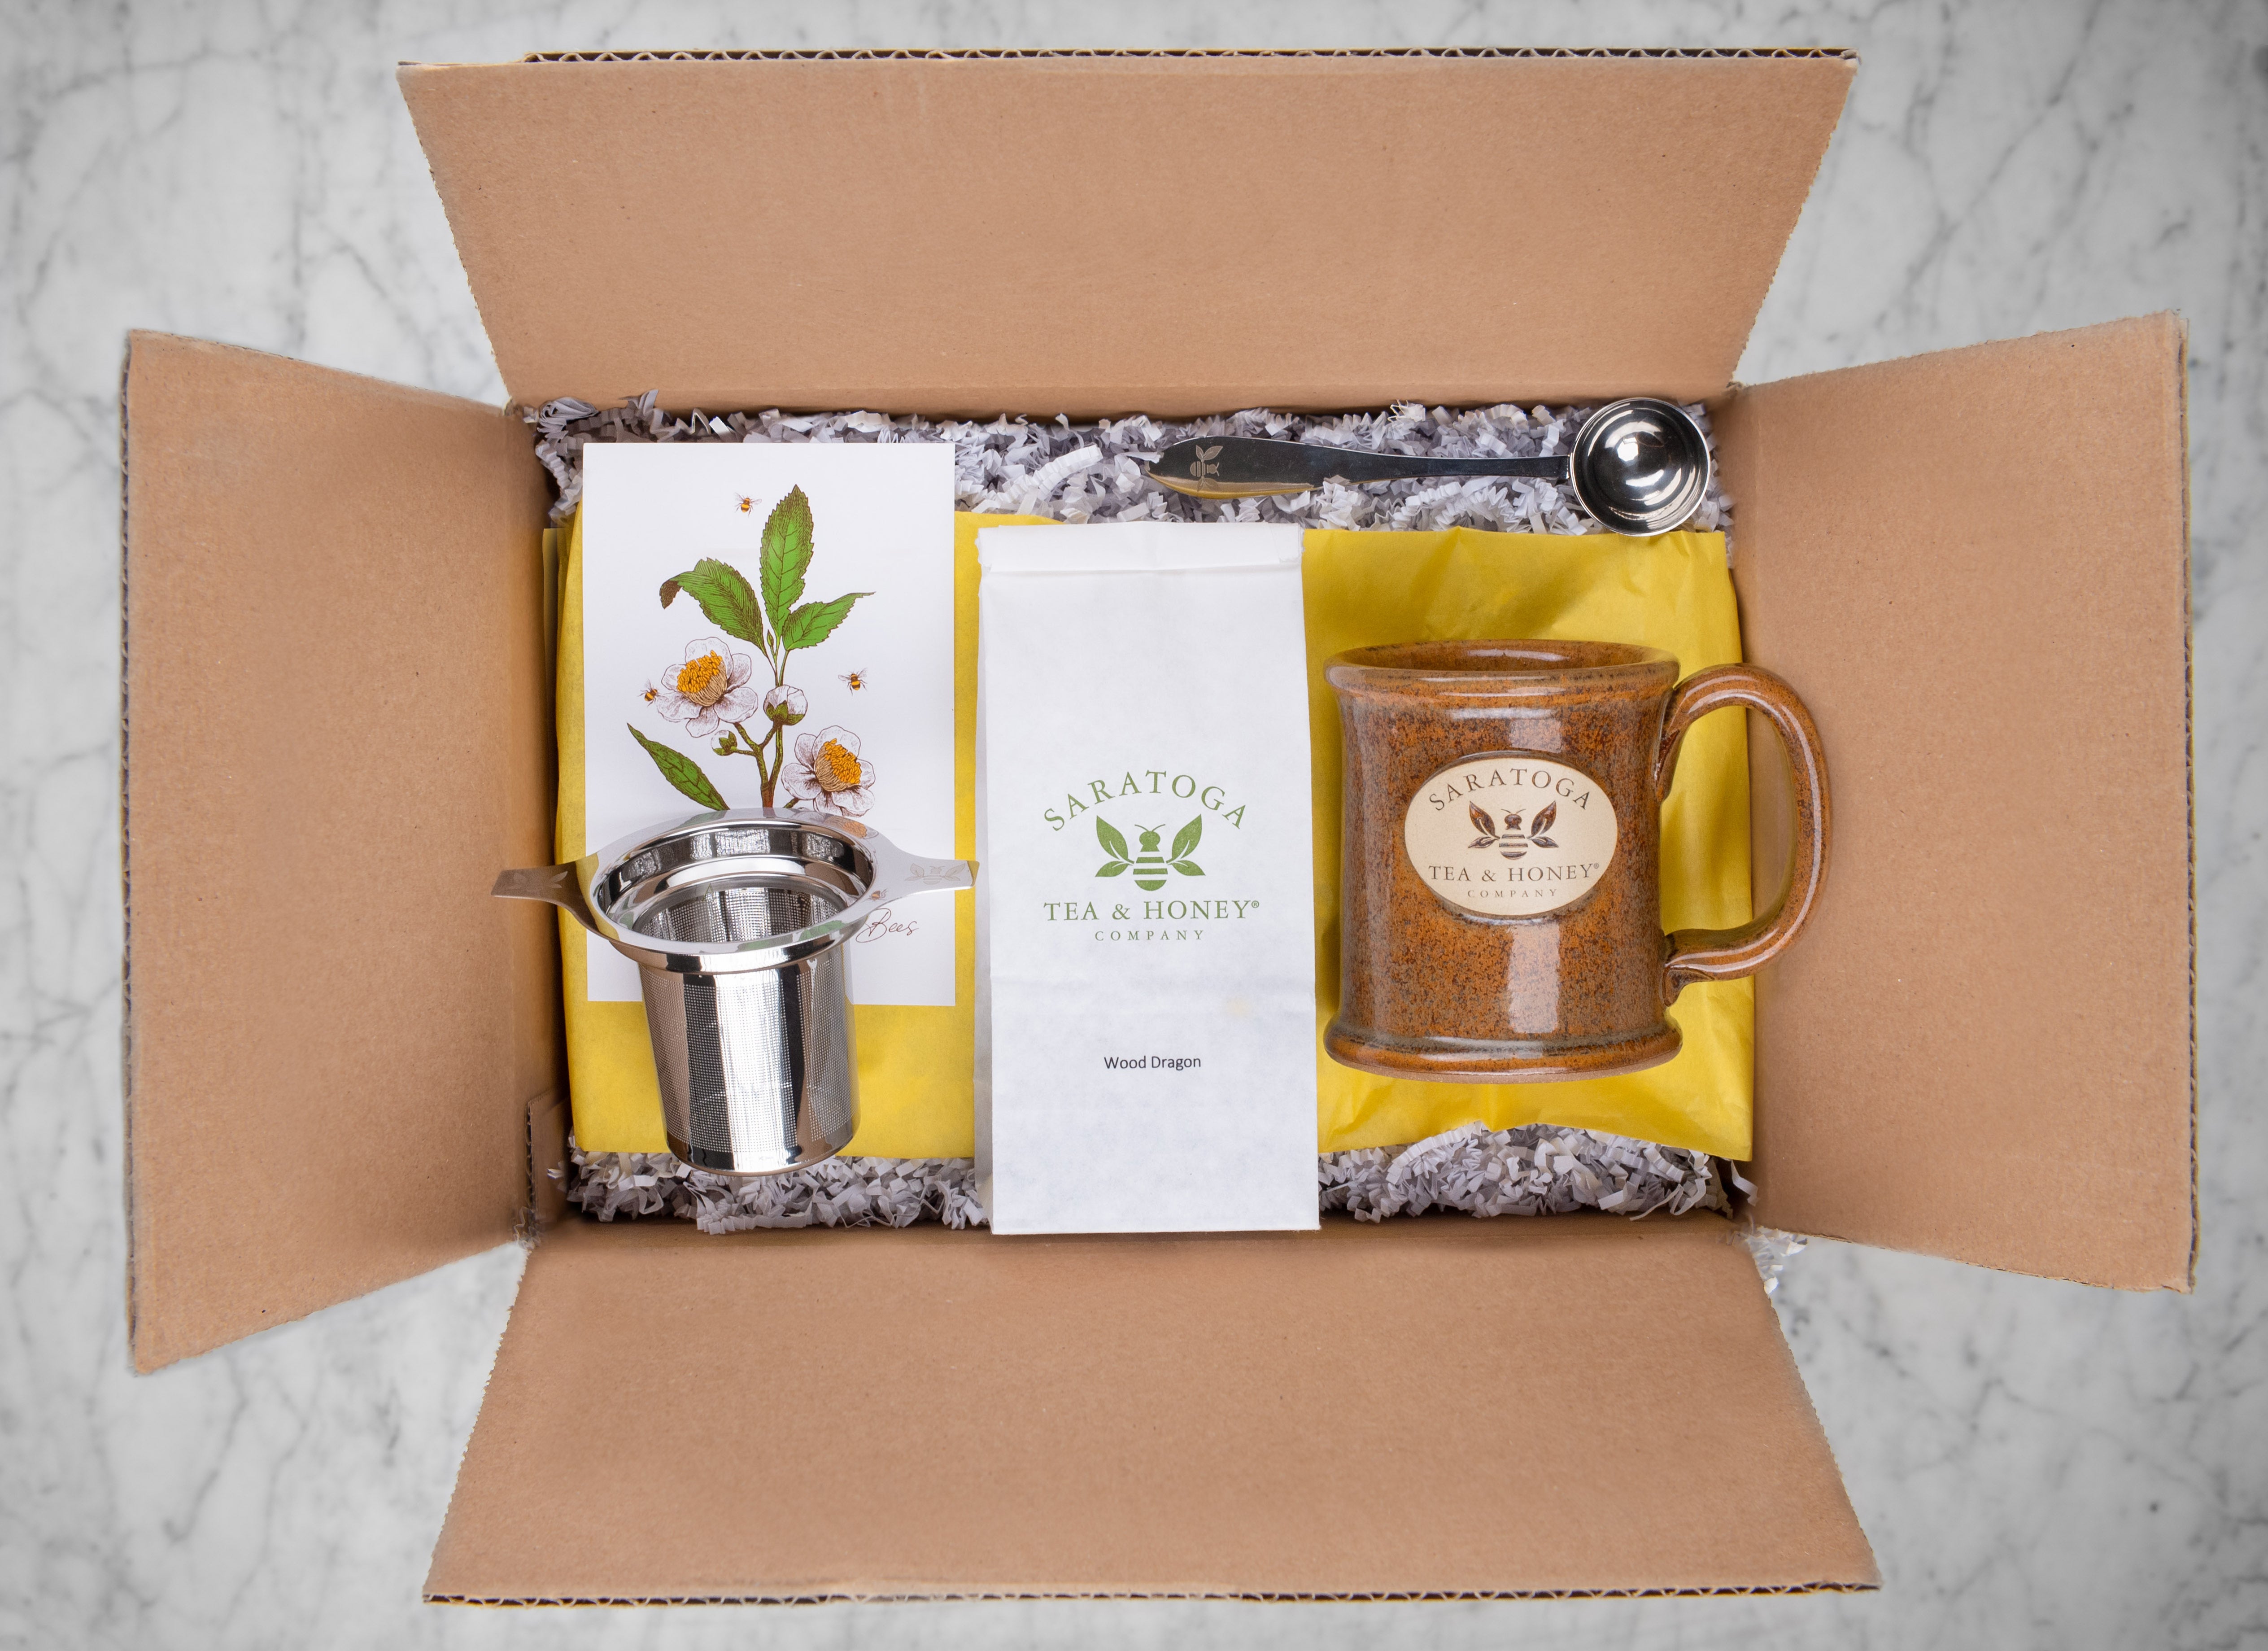 gift box with adirondack themed tea gifts including saratoga tea and honey bee tea infuser, wood dragon oolong tea, saratoga tea and honey branded stoneware mug, gift note, and perfect tea scoop